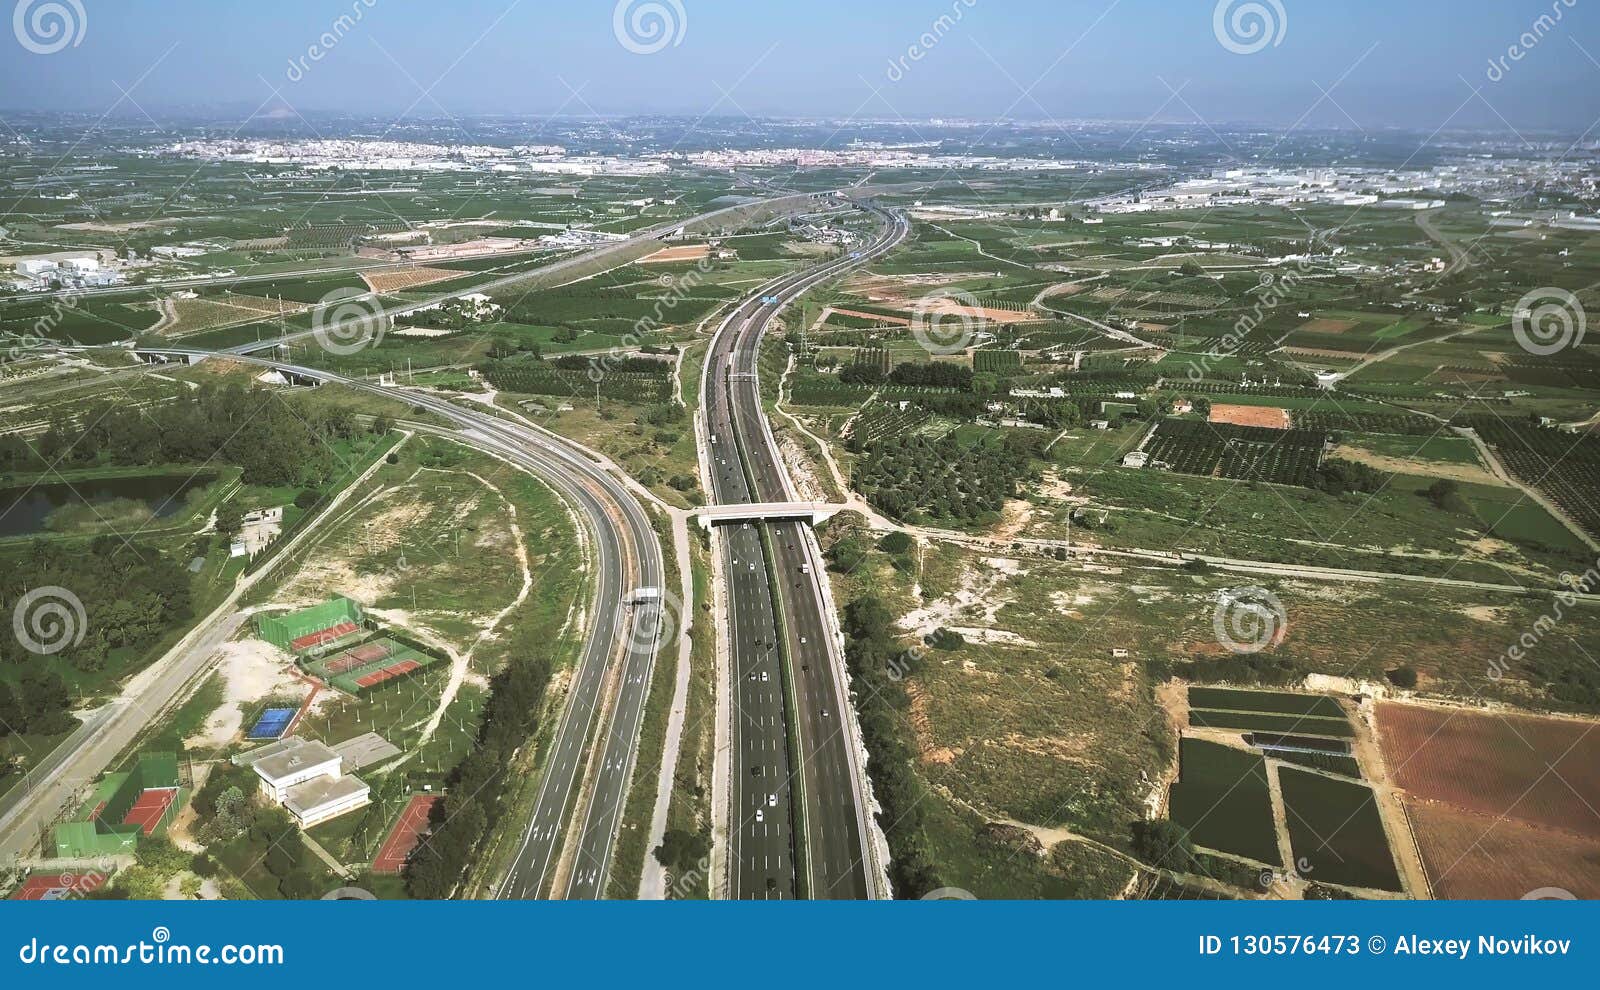 aerial view of major highway traffic on a sunny day, autopista del mediterraneo, spain